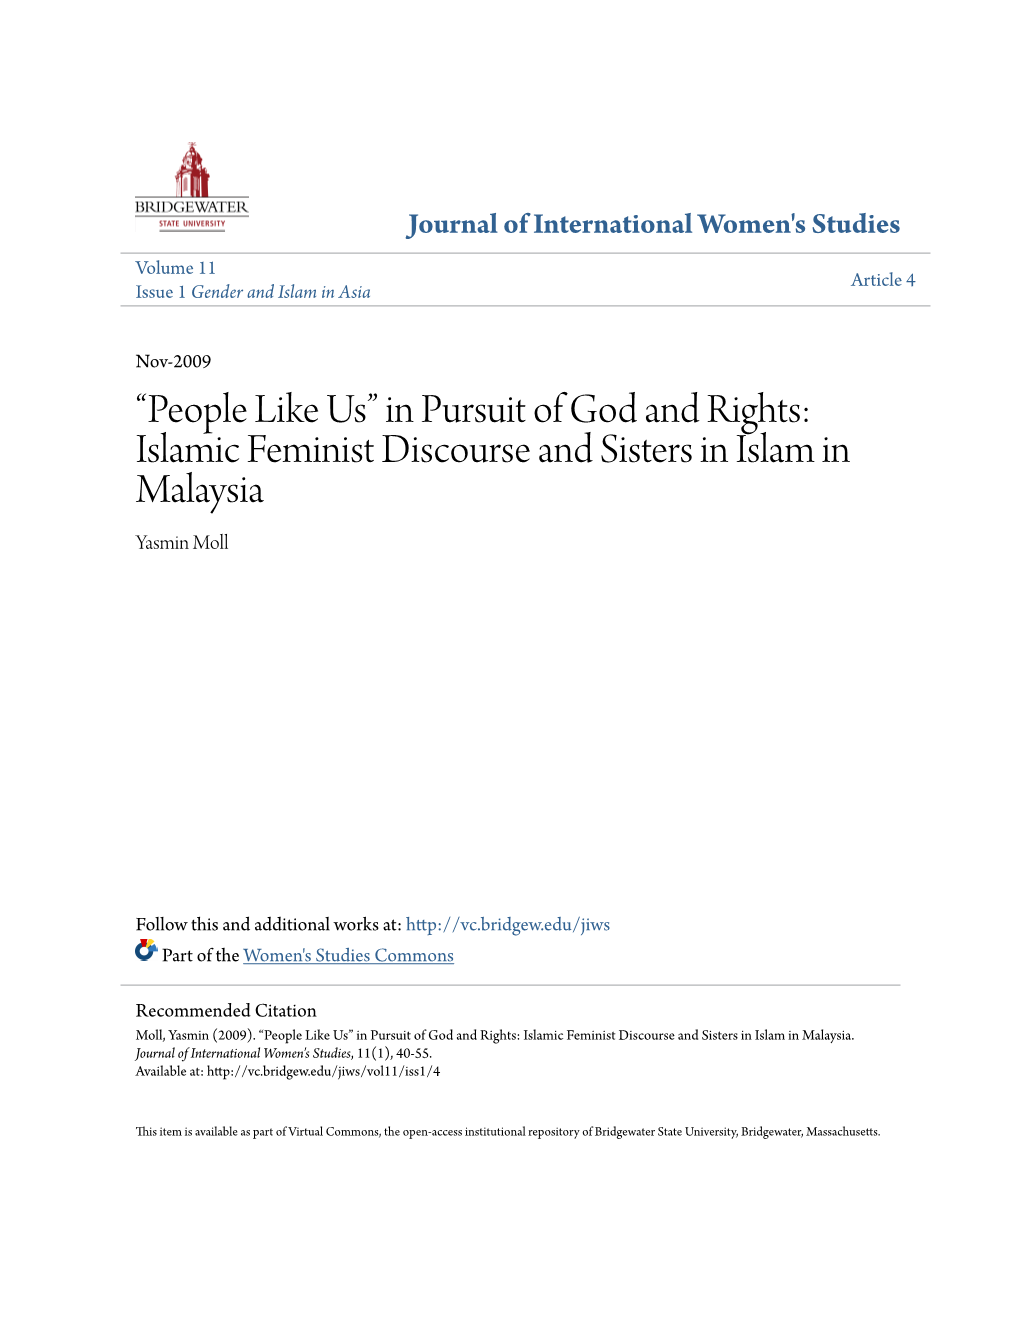 In Pursuit of God and Rights: Islamic Feminist Discourse and Sisters in Islam in Malaysia Yasmin Moll